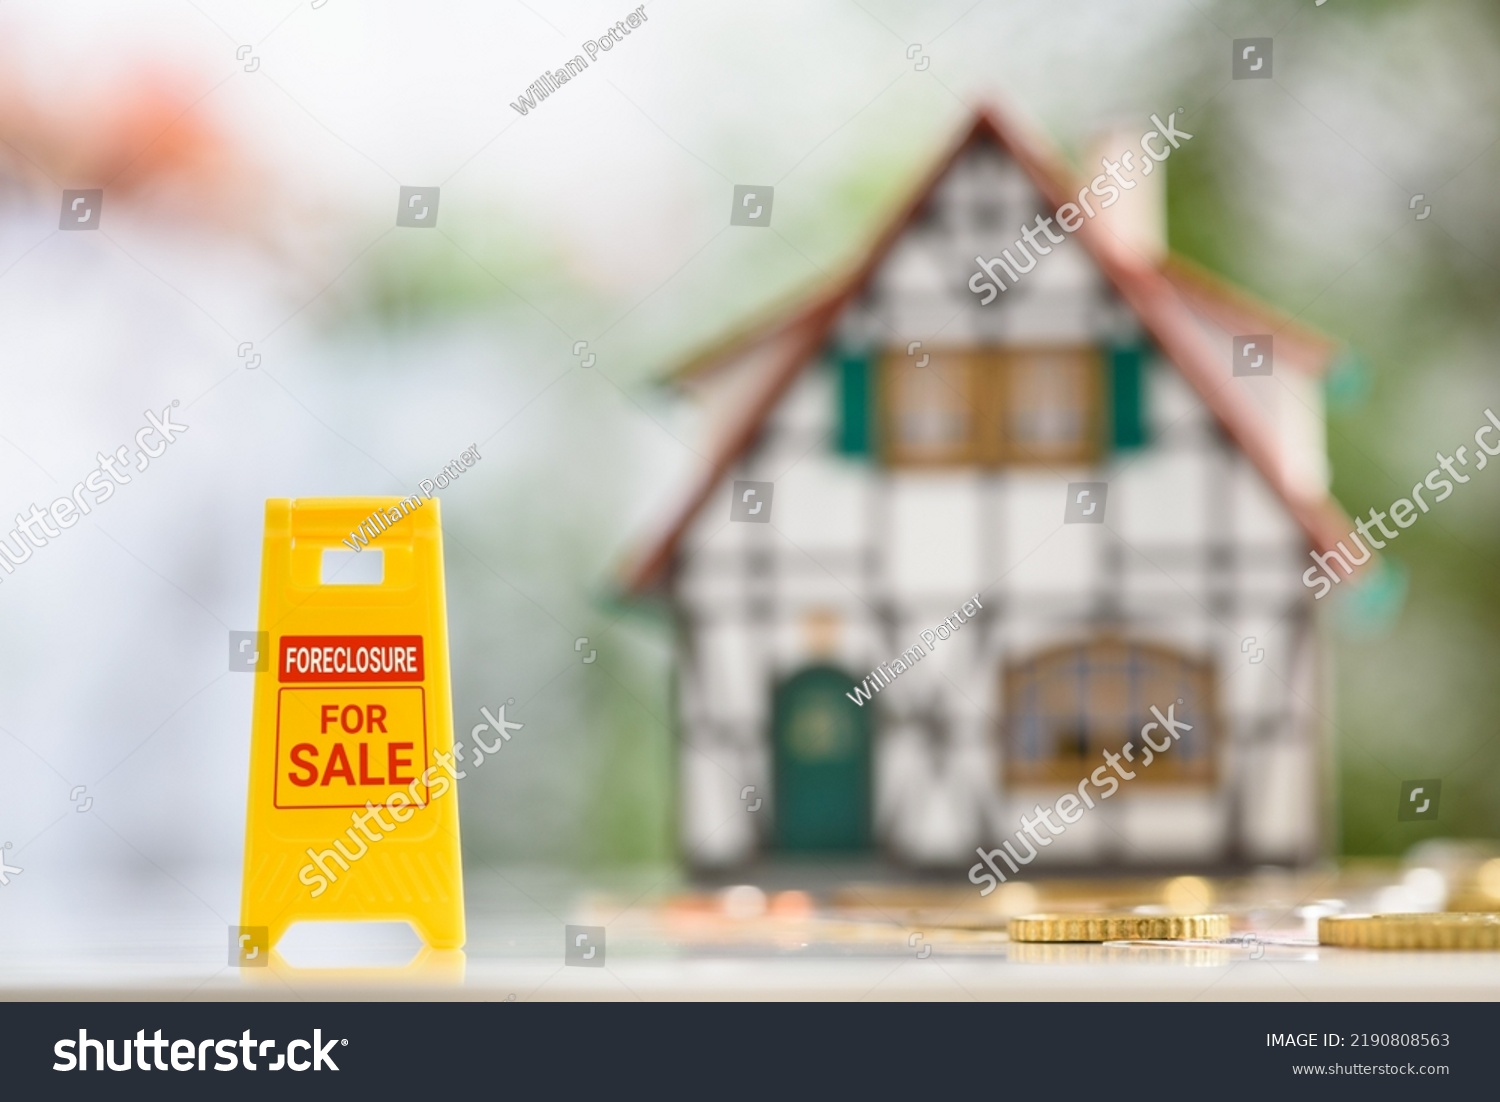 Foreclosures and foreclosed home for sale property listings, financial concept : Yellow warning sign board with the words FORECLOSURE FOR SALE, a two-story half-timbered model house, coins on a table. #2190808563